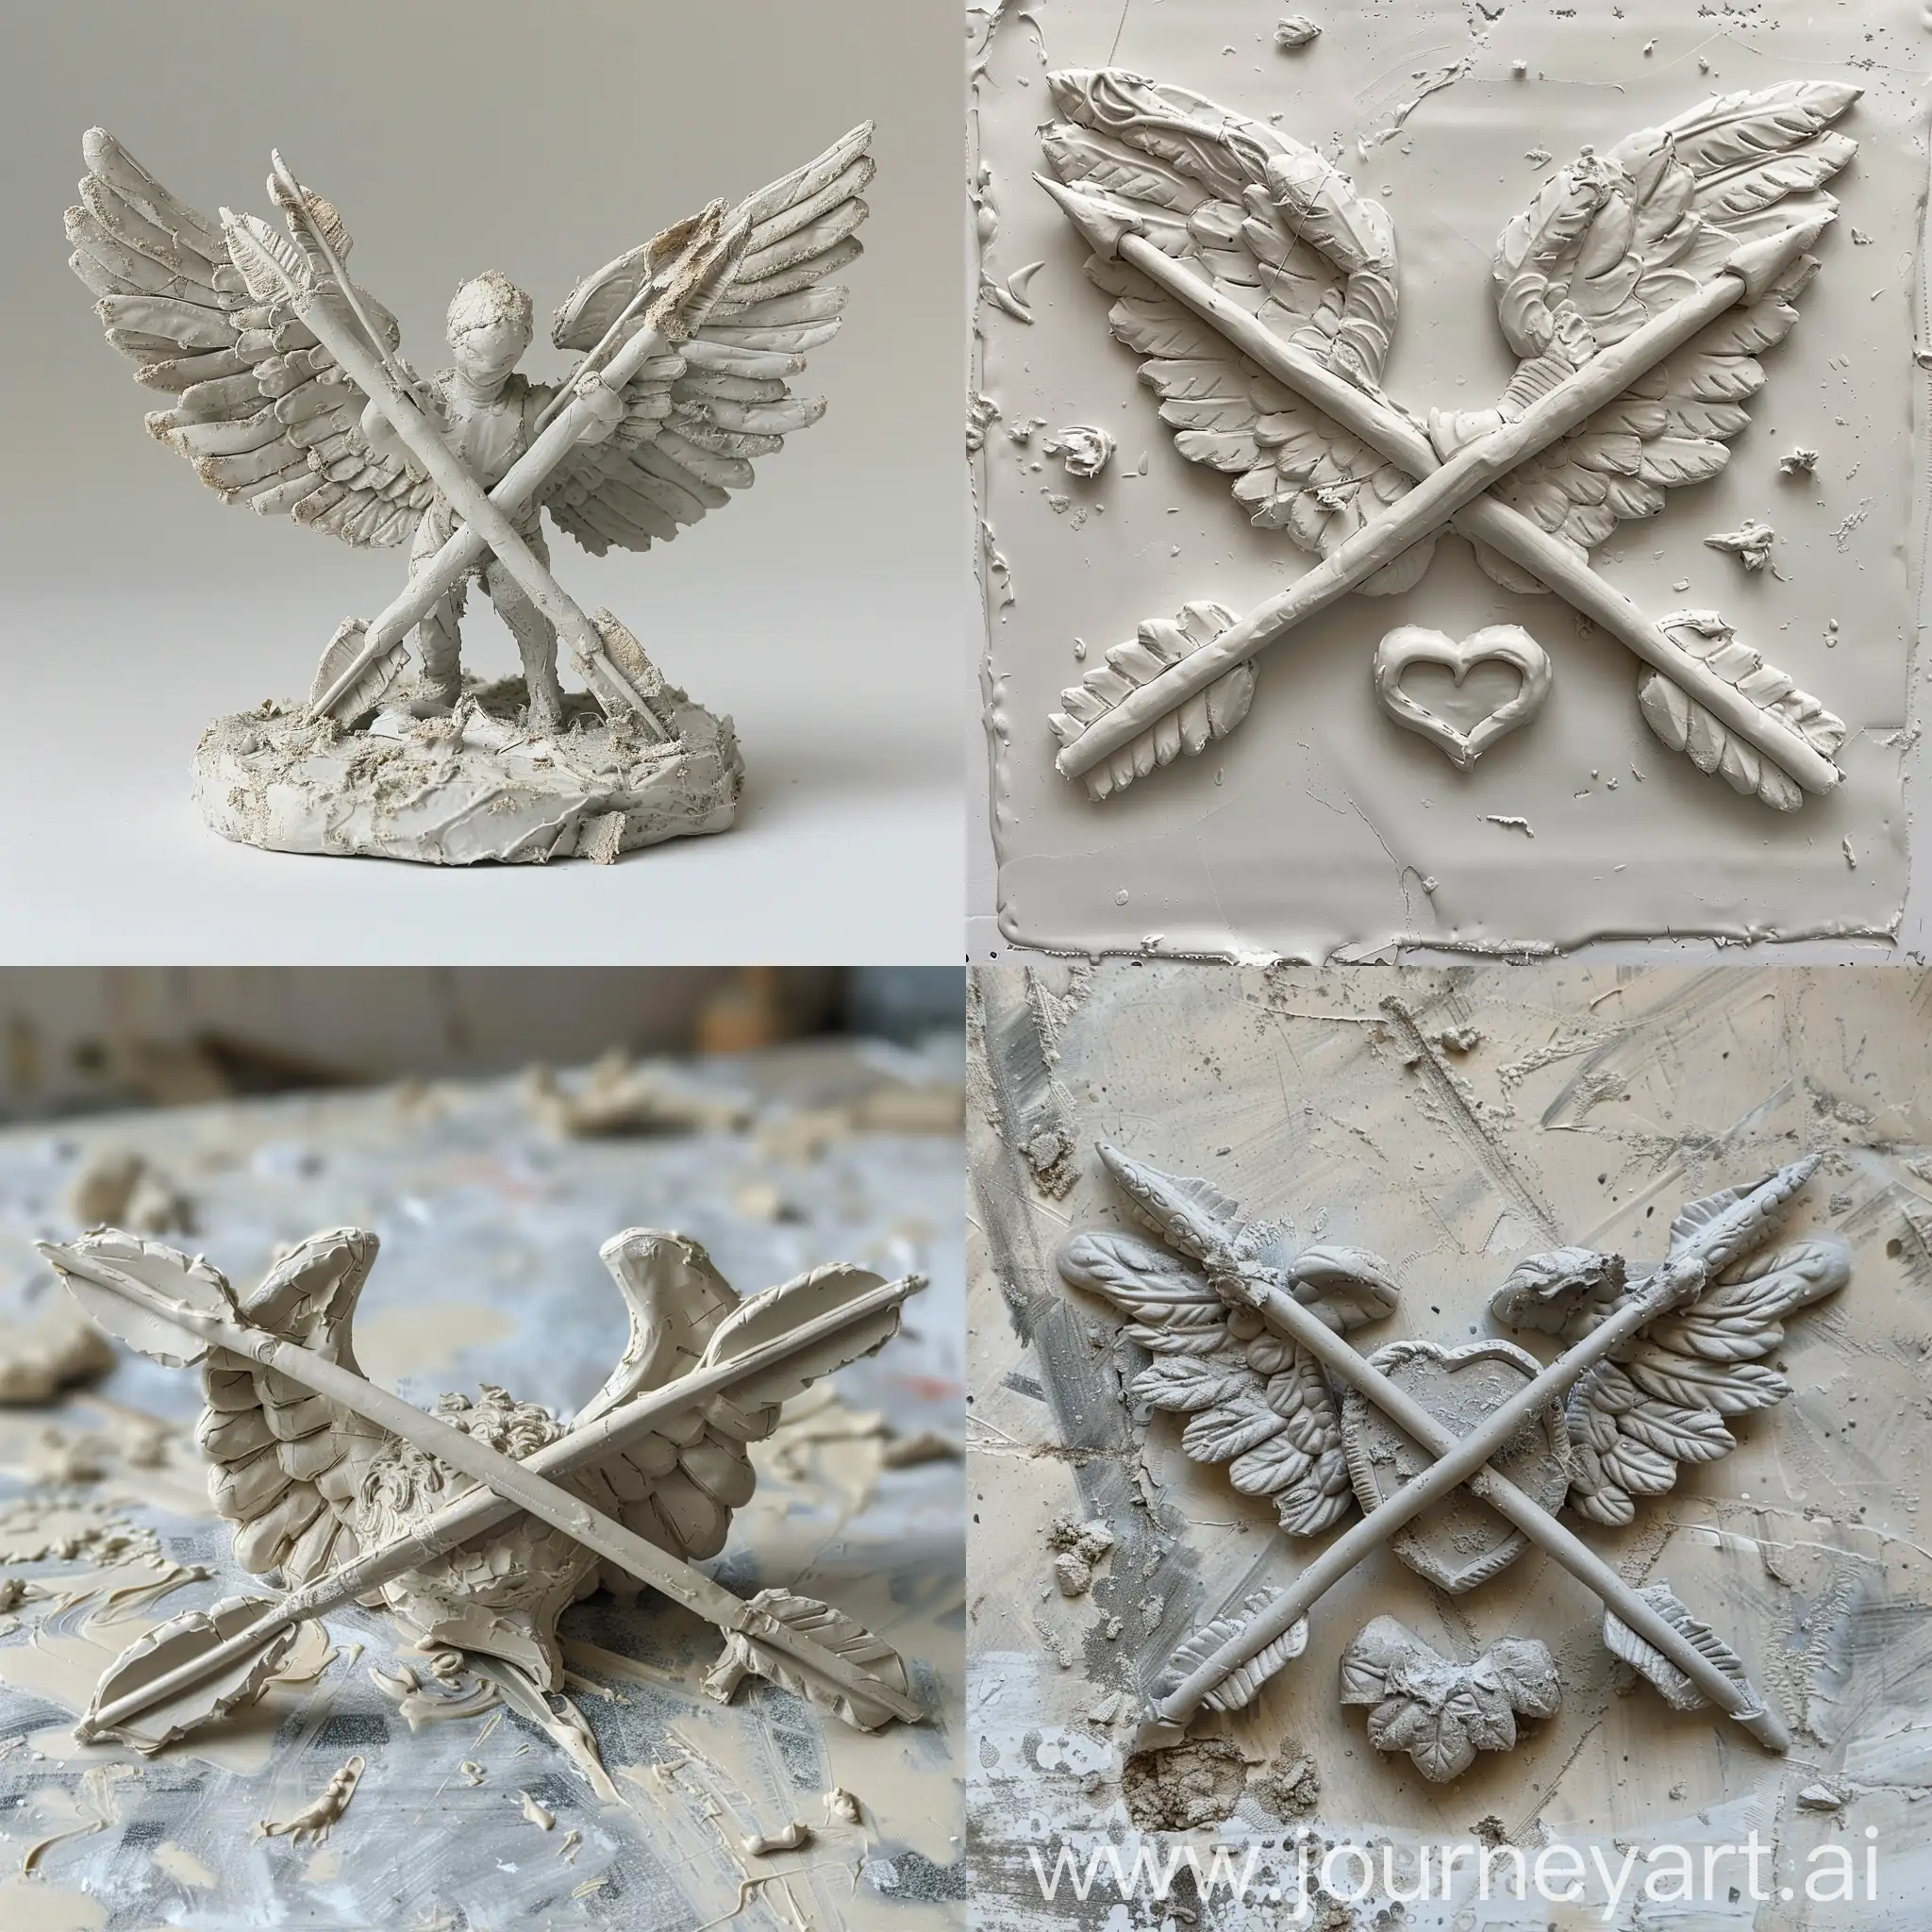 Plasticine-Sculpture-of-Crossed-Arrows-with-Wings